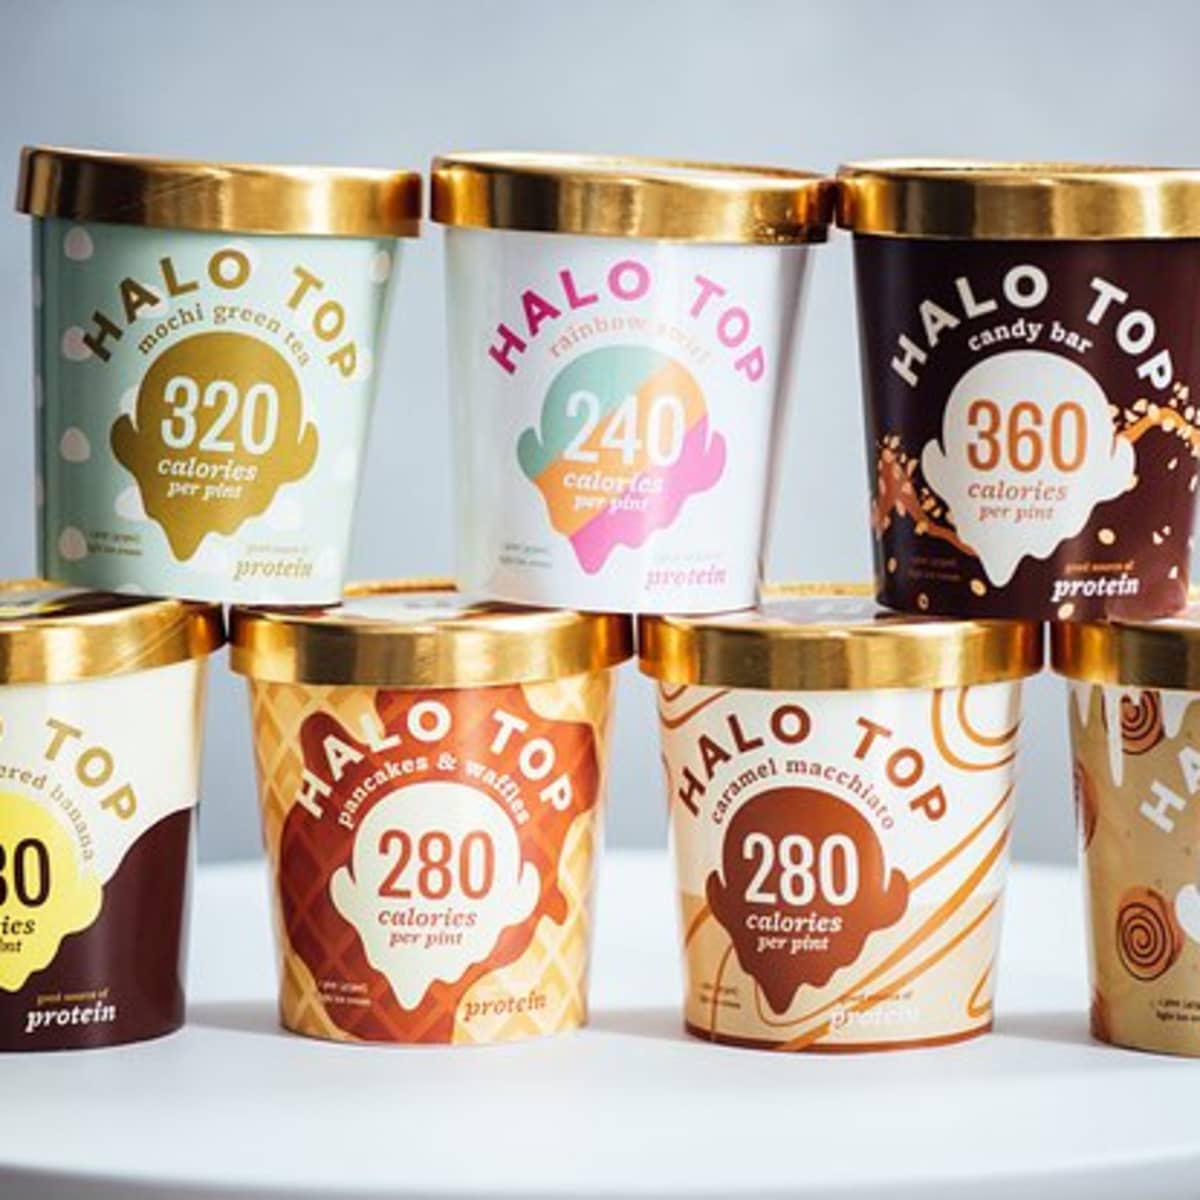 Halo Top makes a pint-sized cooler for ice cream on the go